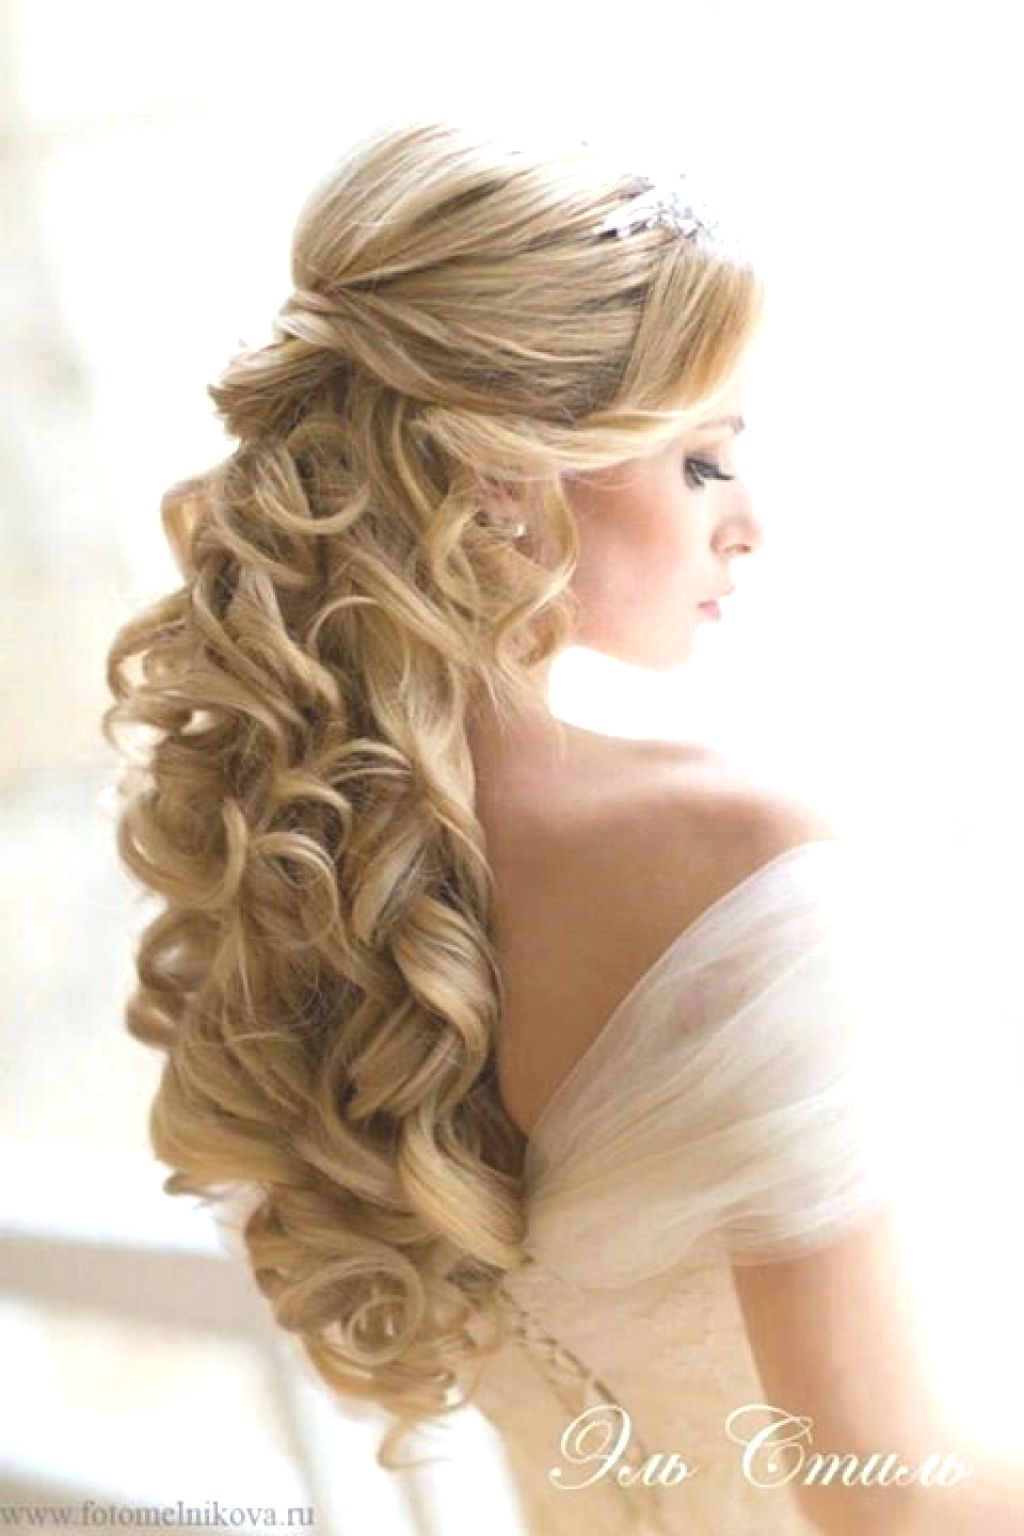 Hairstyles : Side Swept Updos For Weddings Astonishing Intended For Most Recent Side Swept Braid Updo Hairstyles (View 20 of 20)